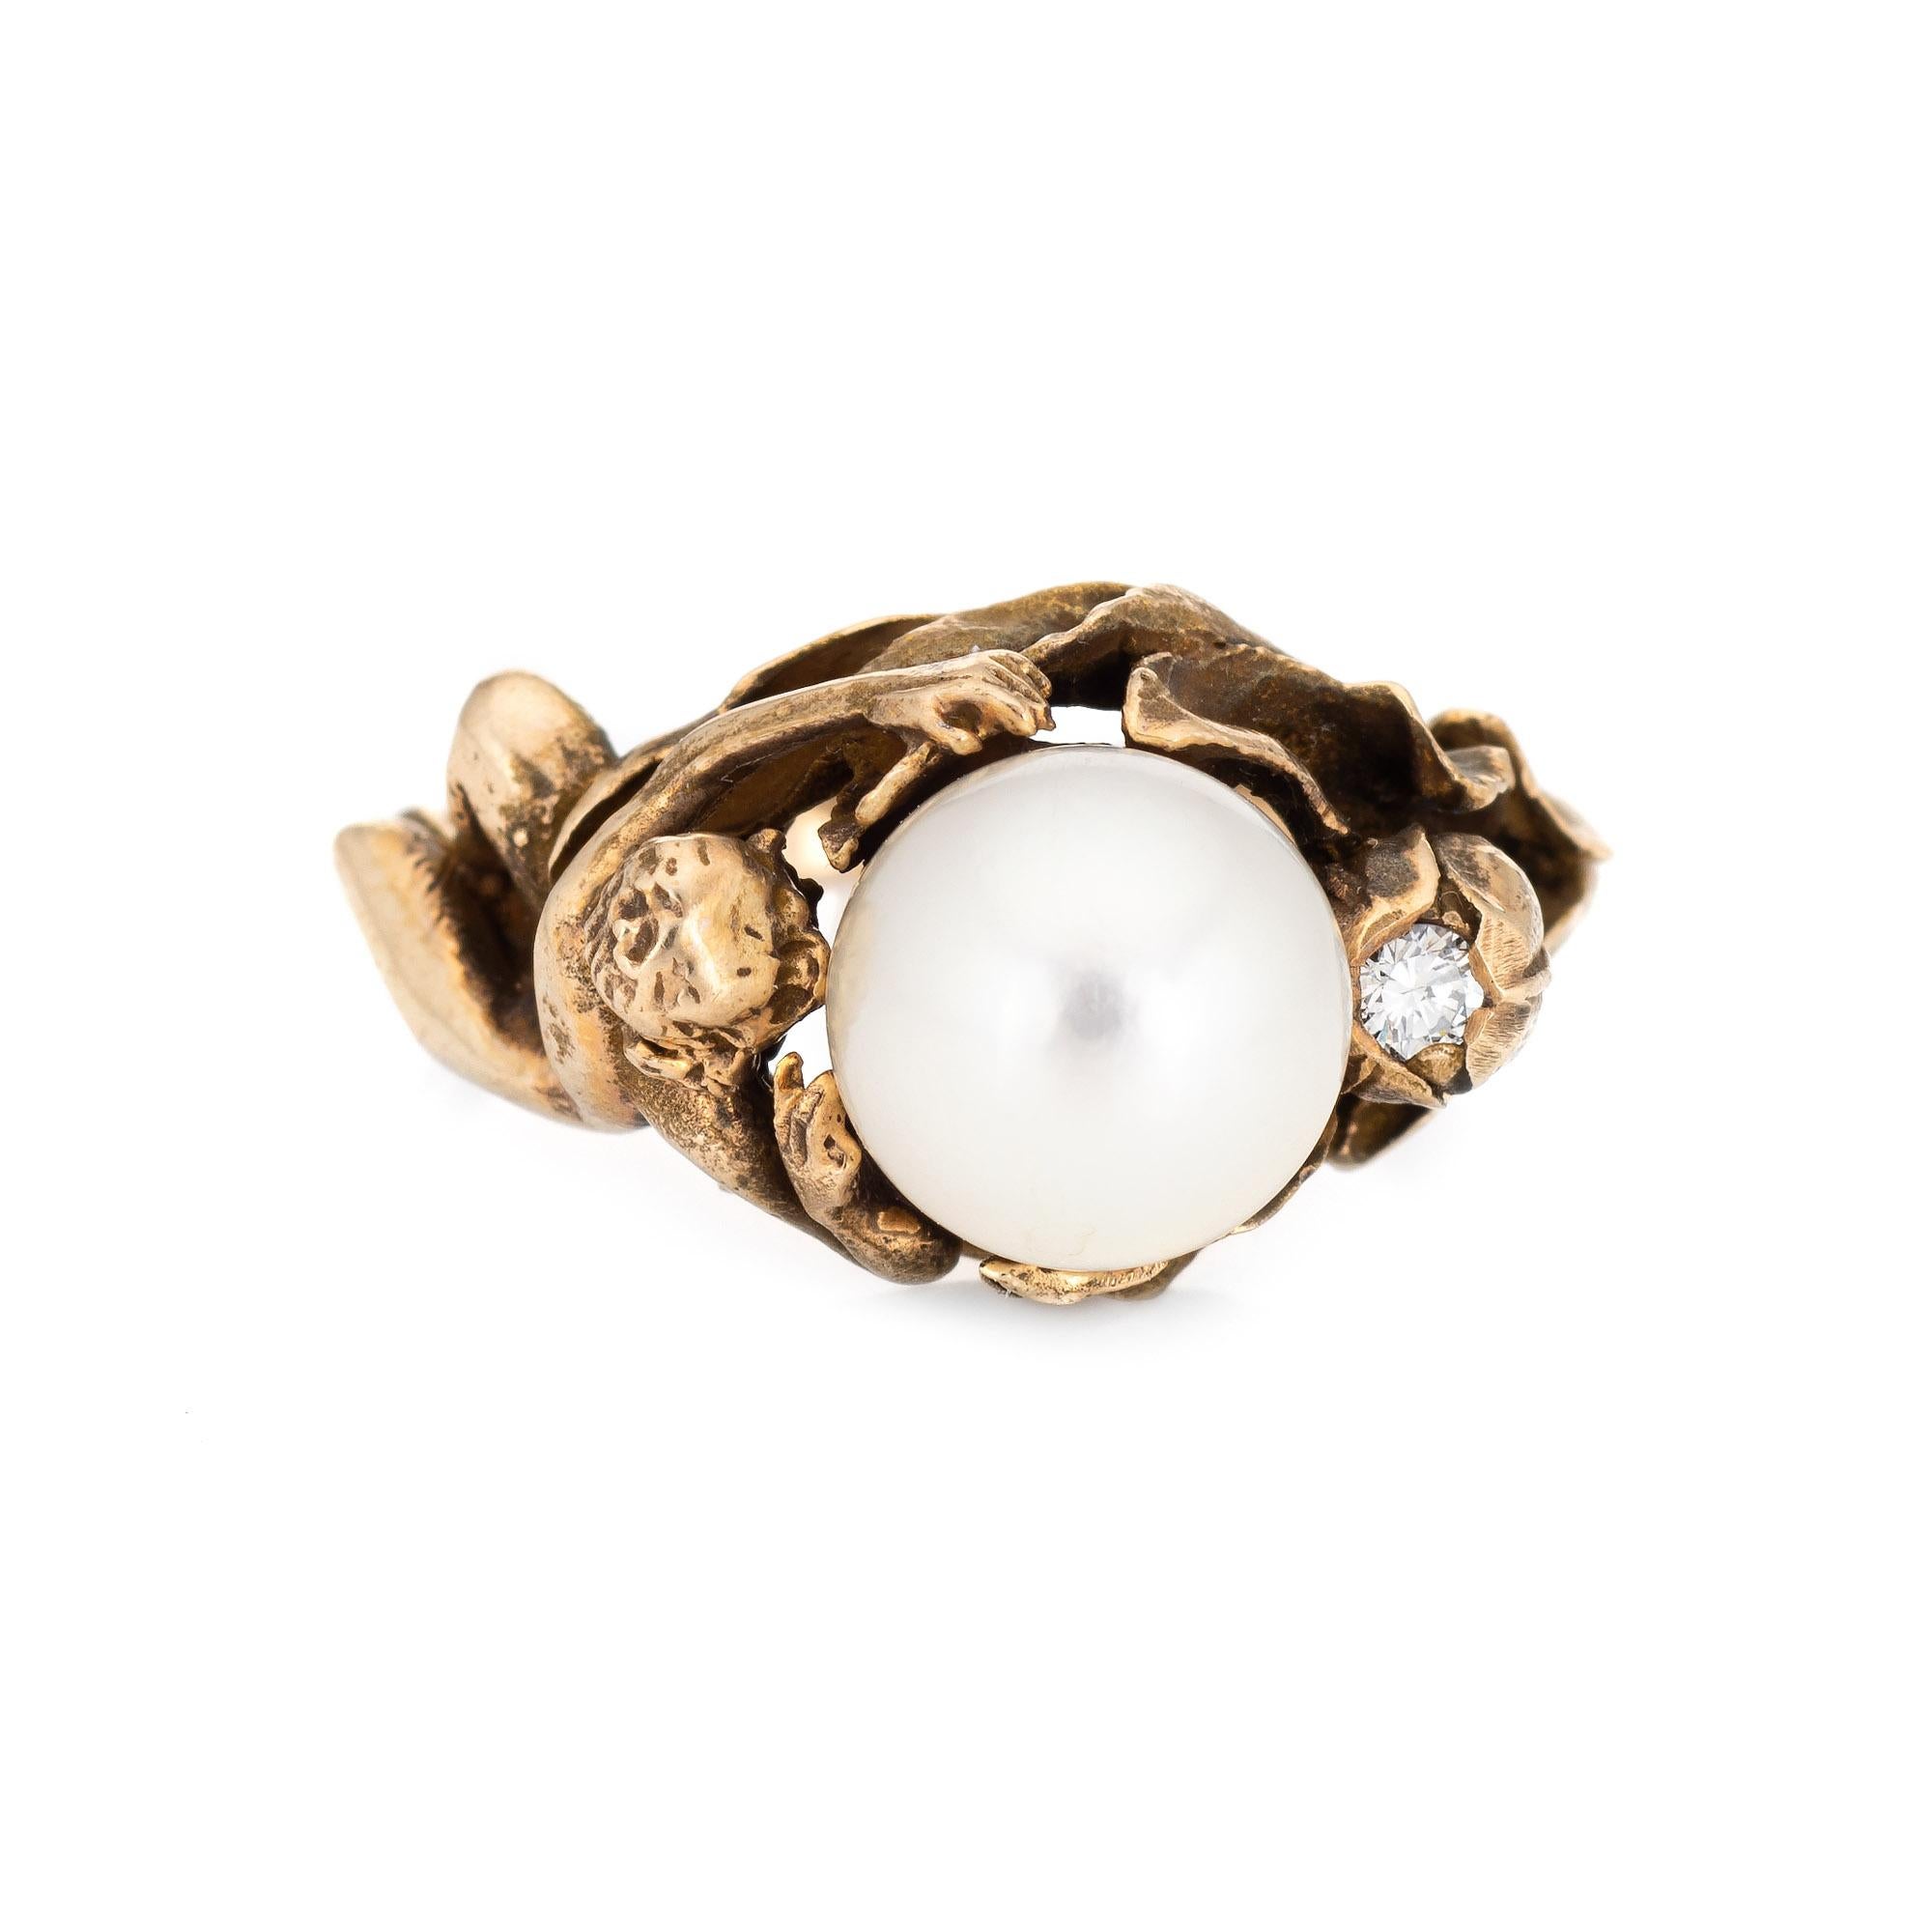 Stylish vintage cultured pearl & diamond nude figural ring crafted in 14 karat yellow gold (circa 1960s). 

Cultured pearl measures 8mm, accented with an estimated 0.04 round brilliant cut diamond (estimated at H-I color and SI1 clarity).

The